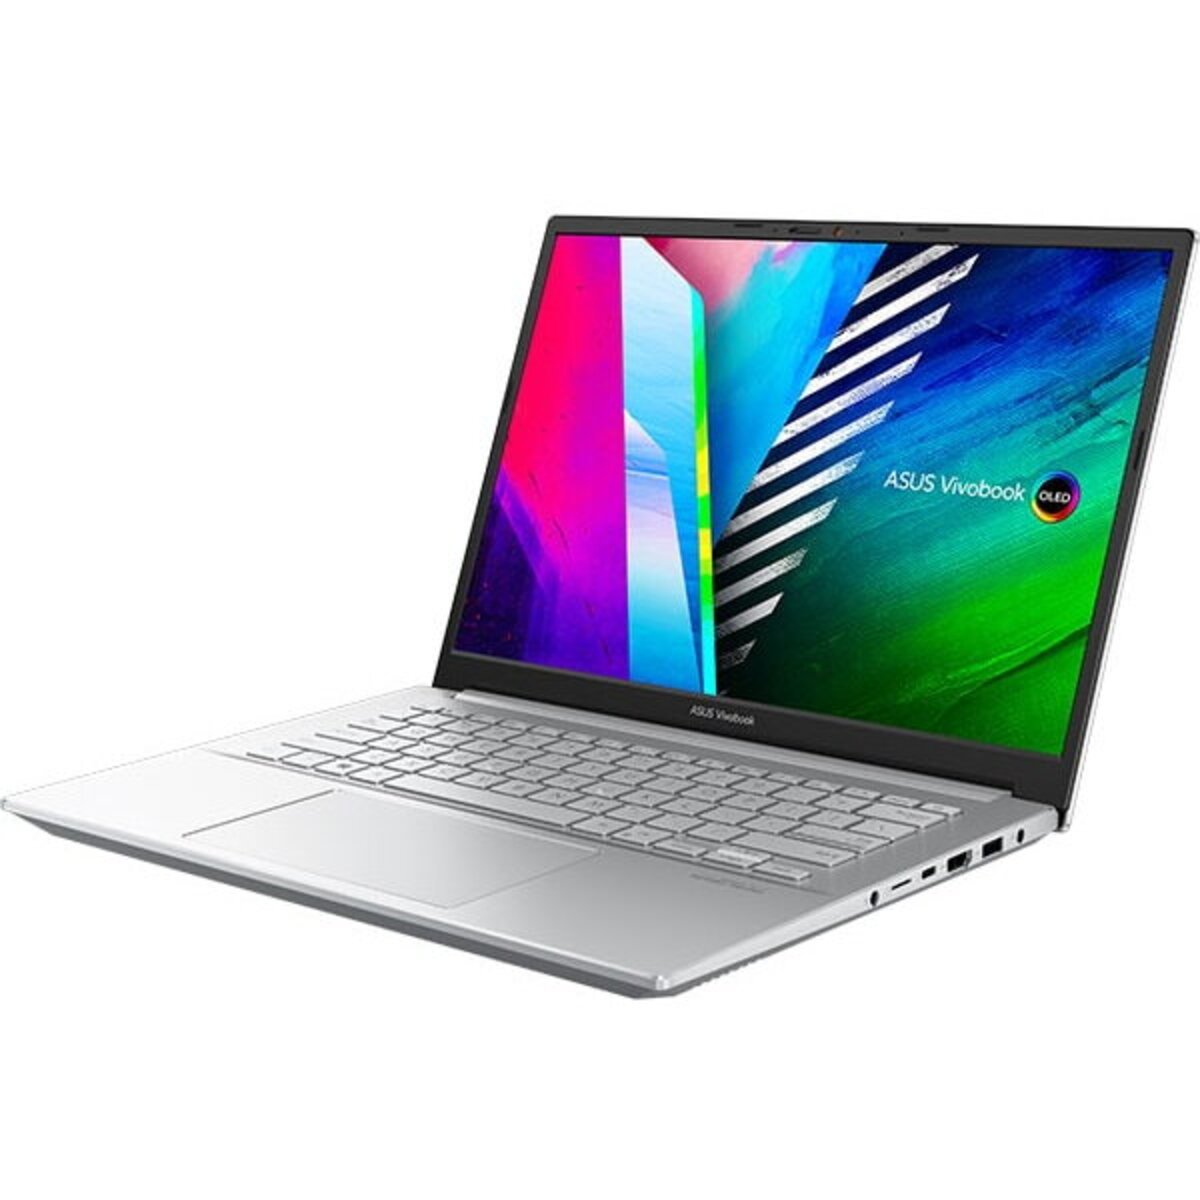 Asus VivoBook K3400PH-KM080T, Core i7-11370H, 8GB RAM 512GB SSD, 4GB GTX 1650, 14.0 Inches OLED WQ, Windows 10. Cool Silver